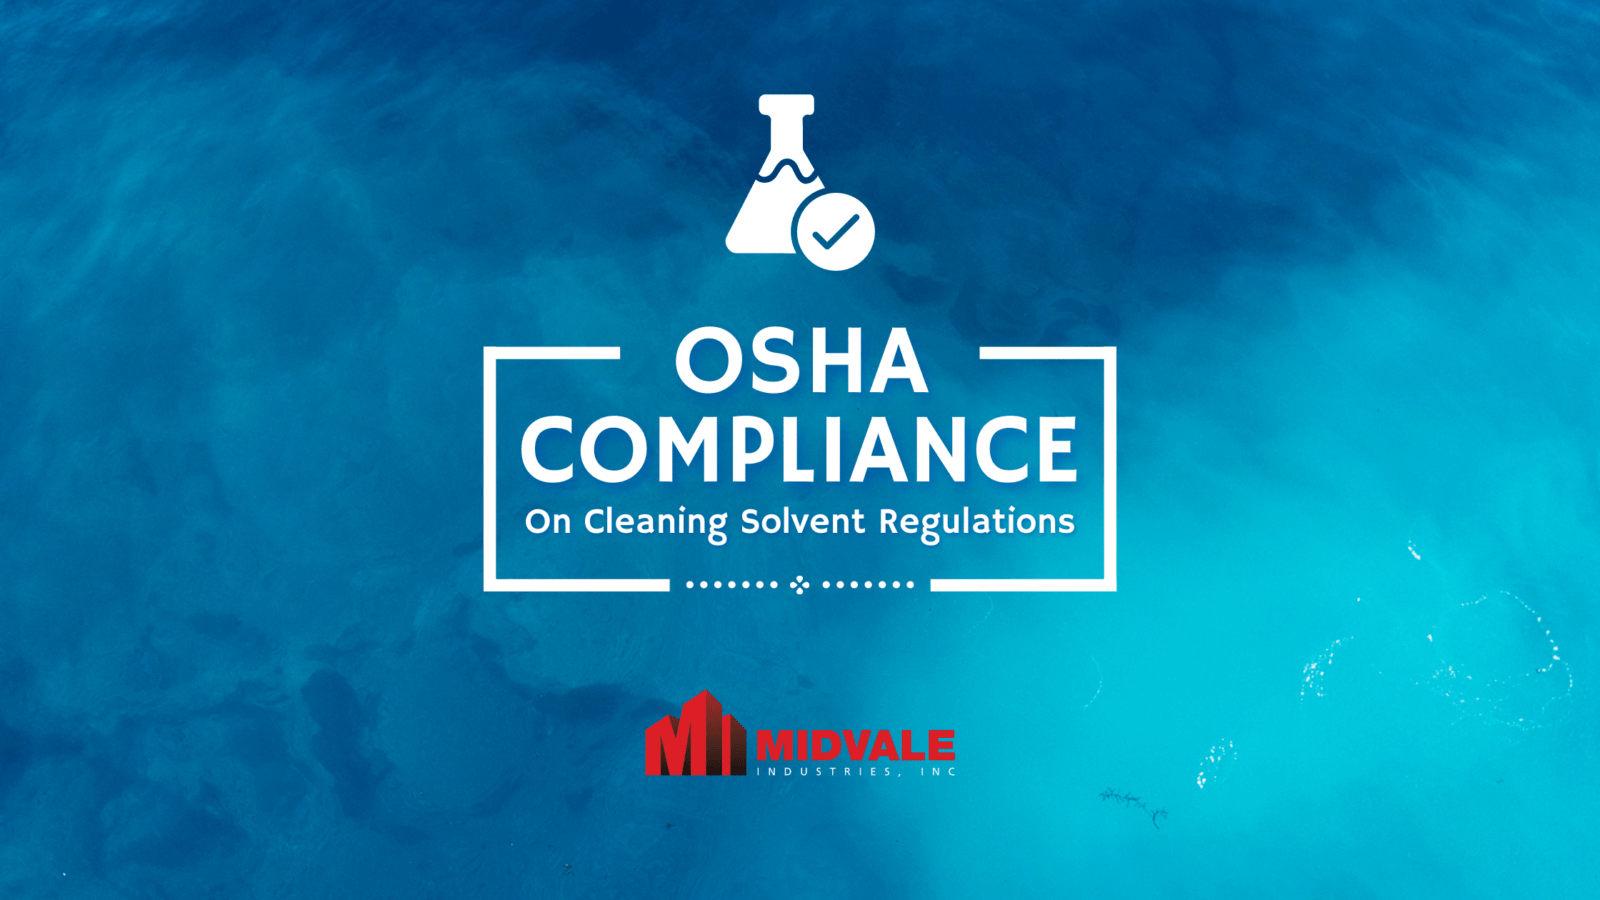 osha compliance for cleaning solvents